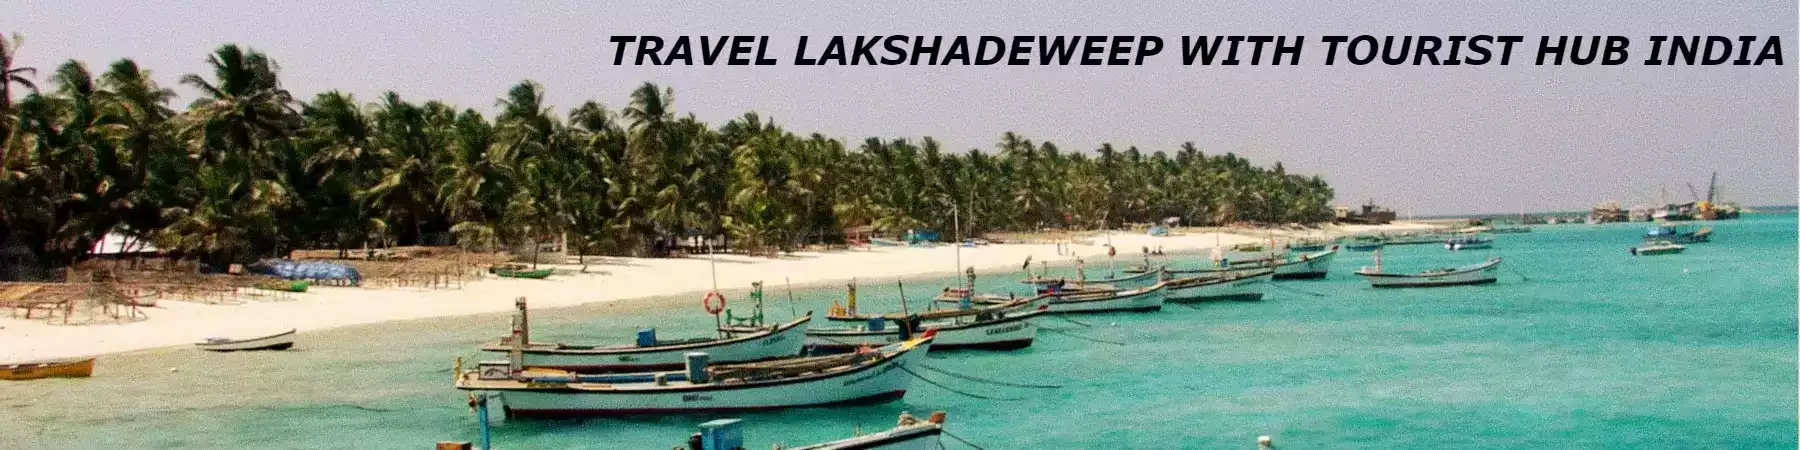 Lakshadweep package tour from Kochi with Tourist Hub India - The Best Lakshadweep Travel Agency